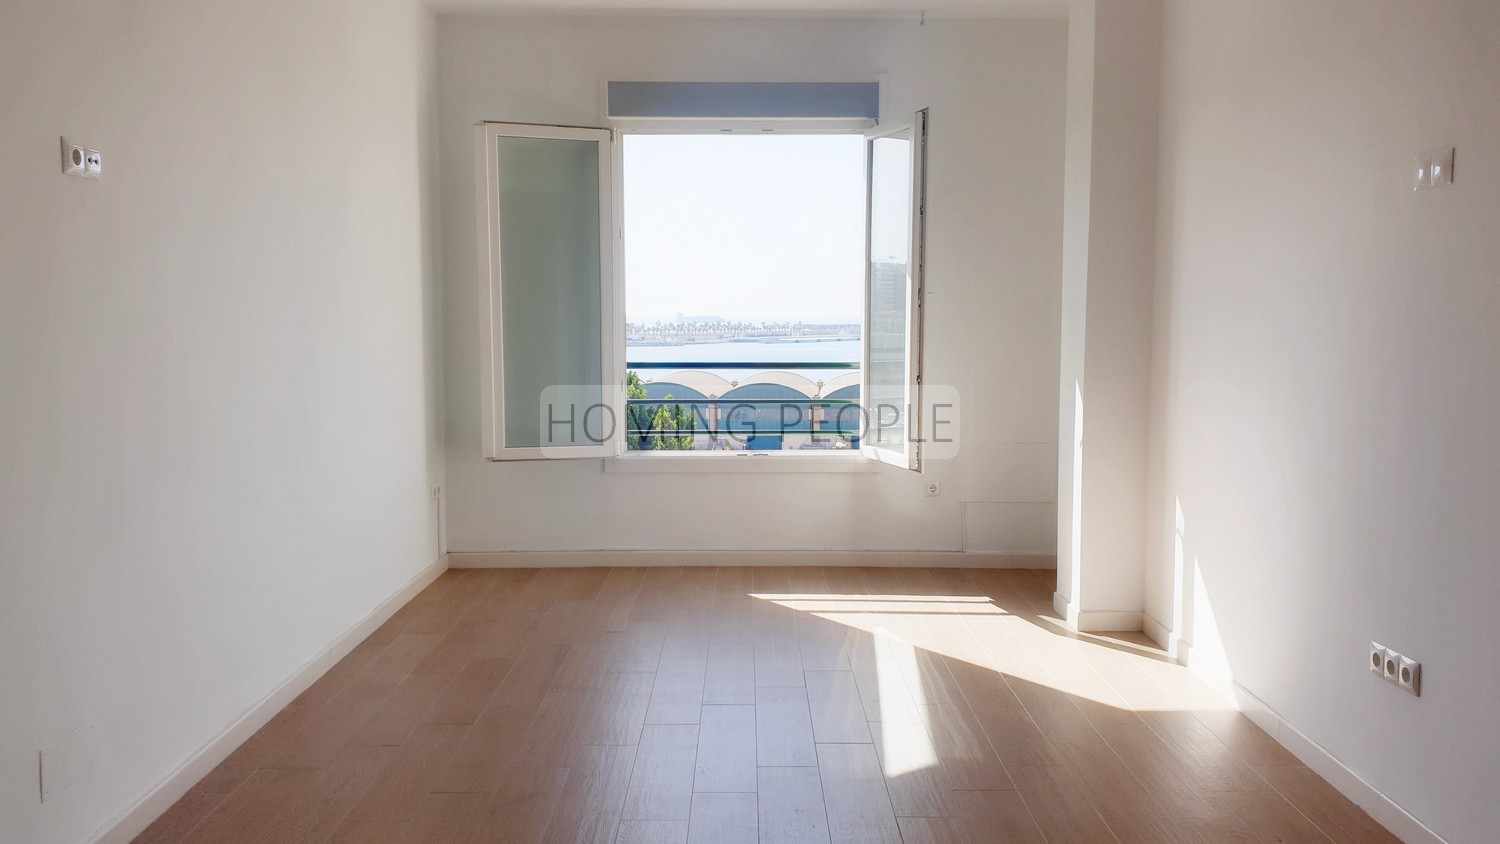 RENTED OUT_Newly remodeled, unfurnished flat facing the harbour, literally 5 minutes' walk to the centre!